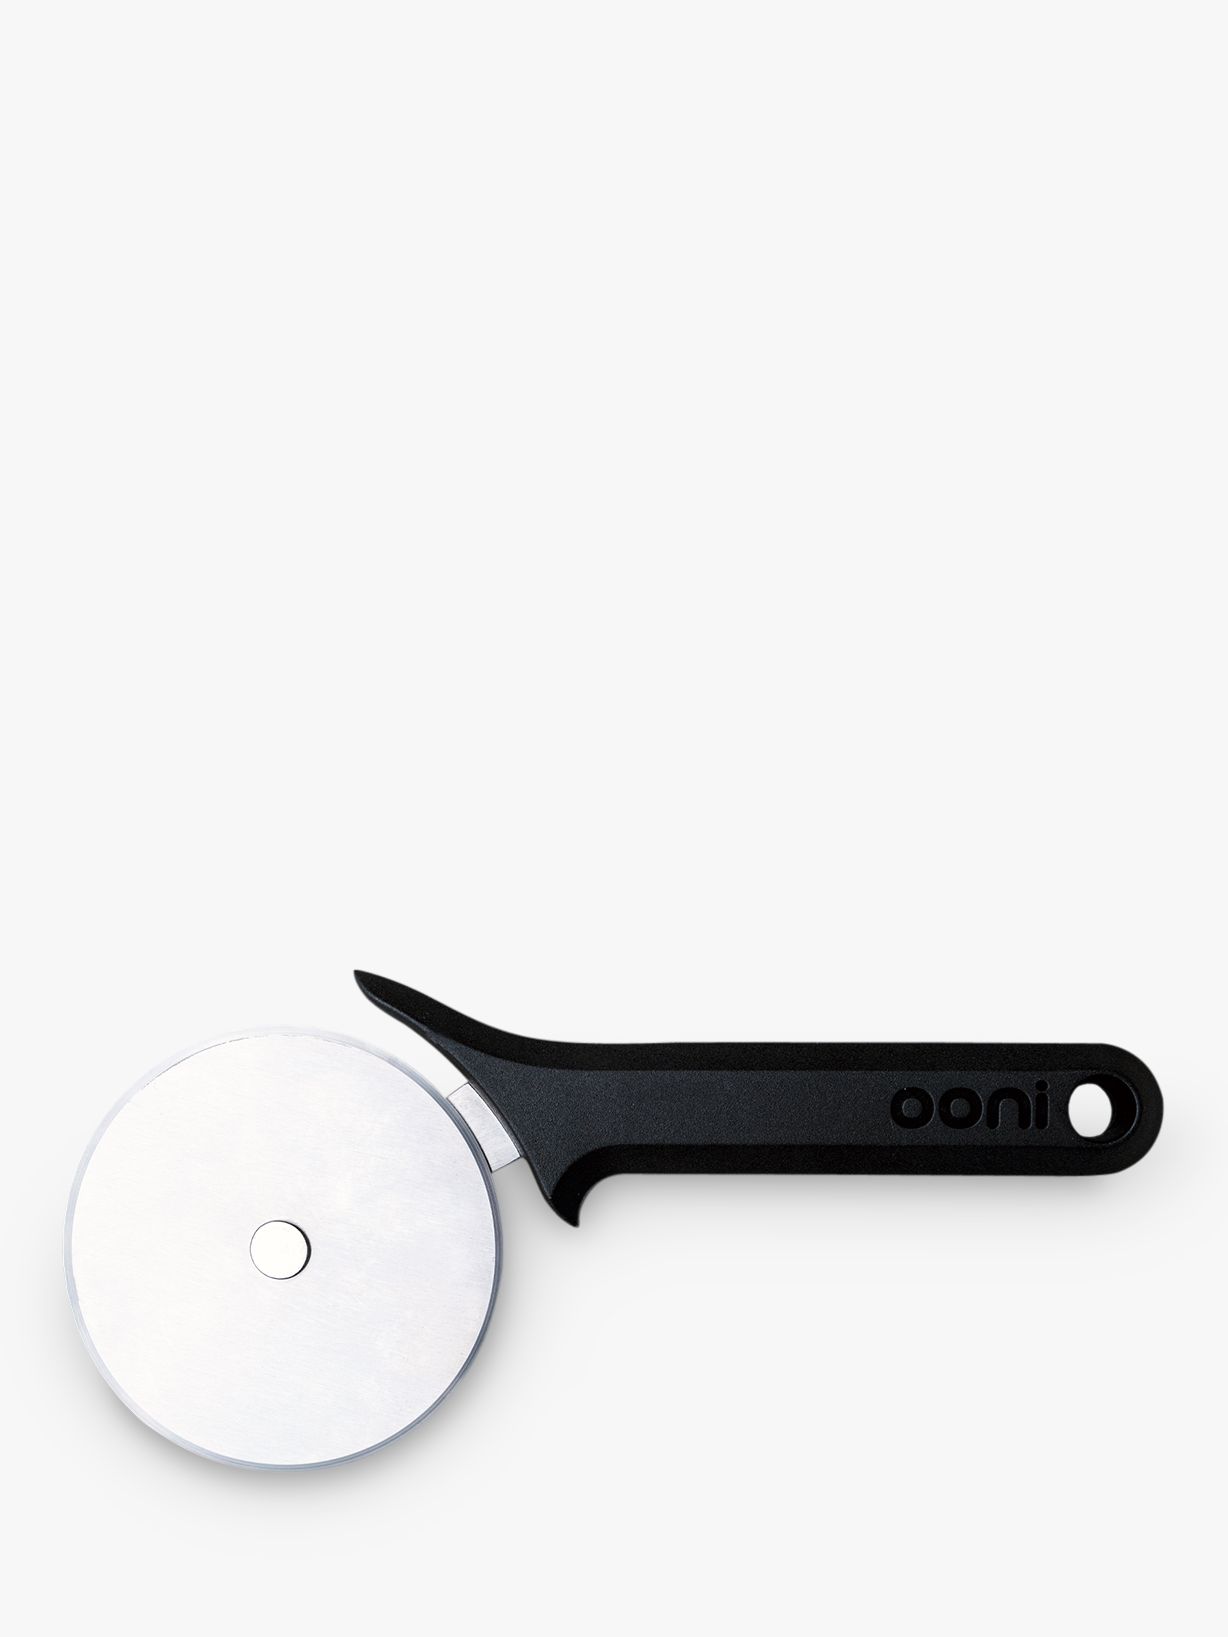 Photo of Ooni stainless steel pizza cutter wheel